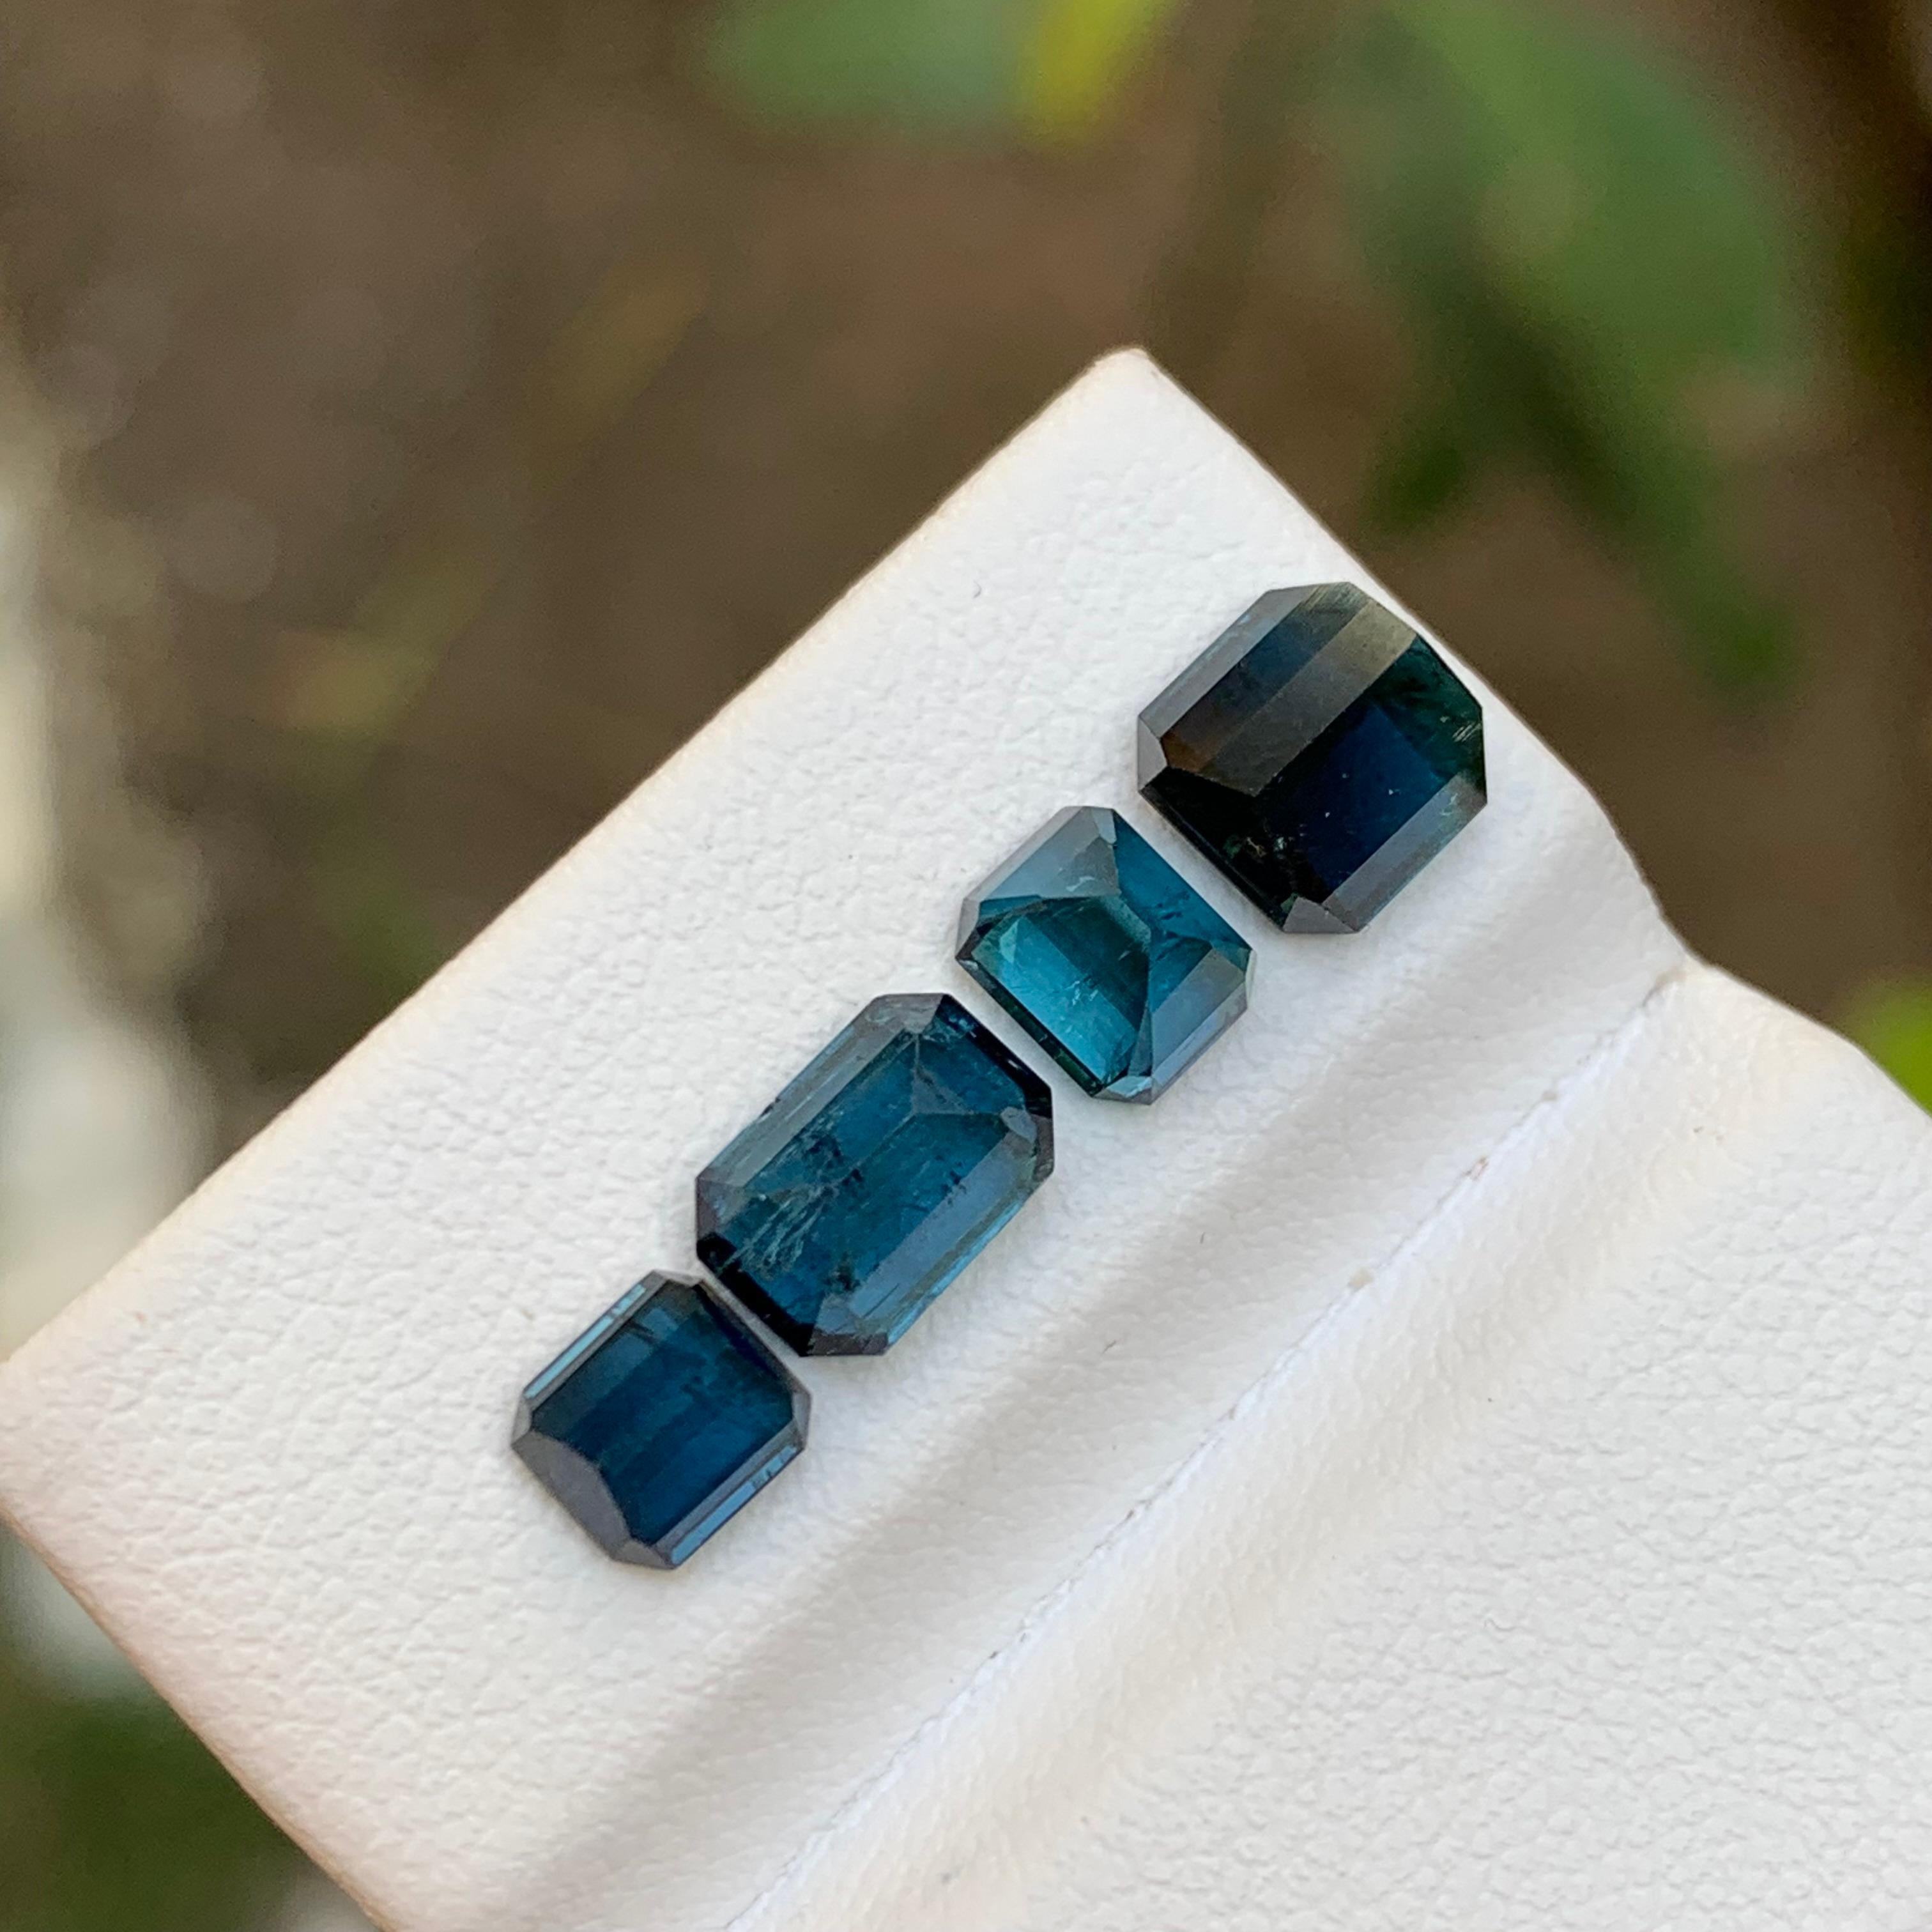 Emerald Cut Rare Darkish Inky Blue Natural Tourmaline Gemstones Lot, 4.85 Ct for Jewelry For Sale